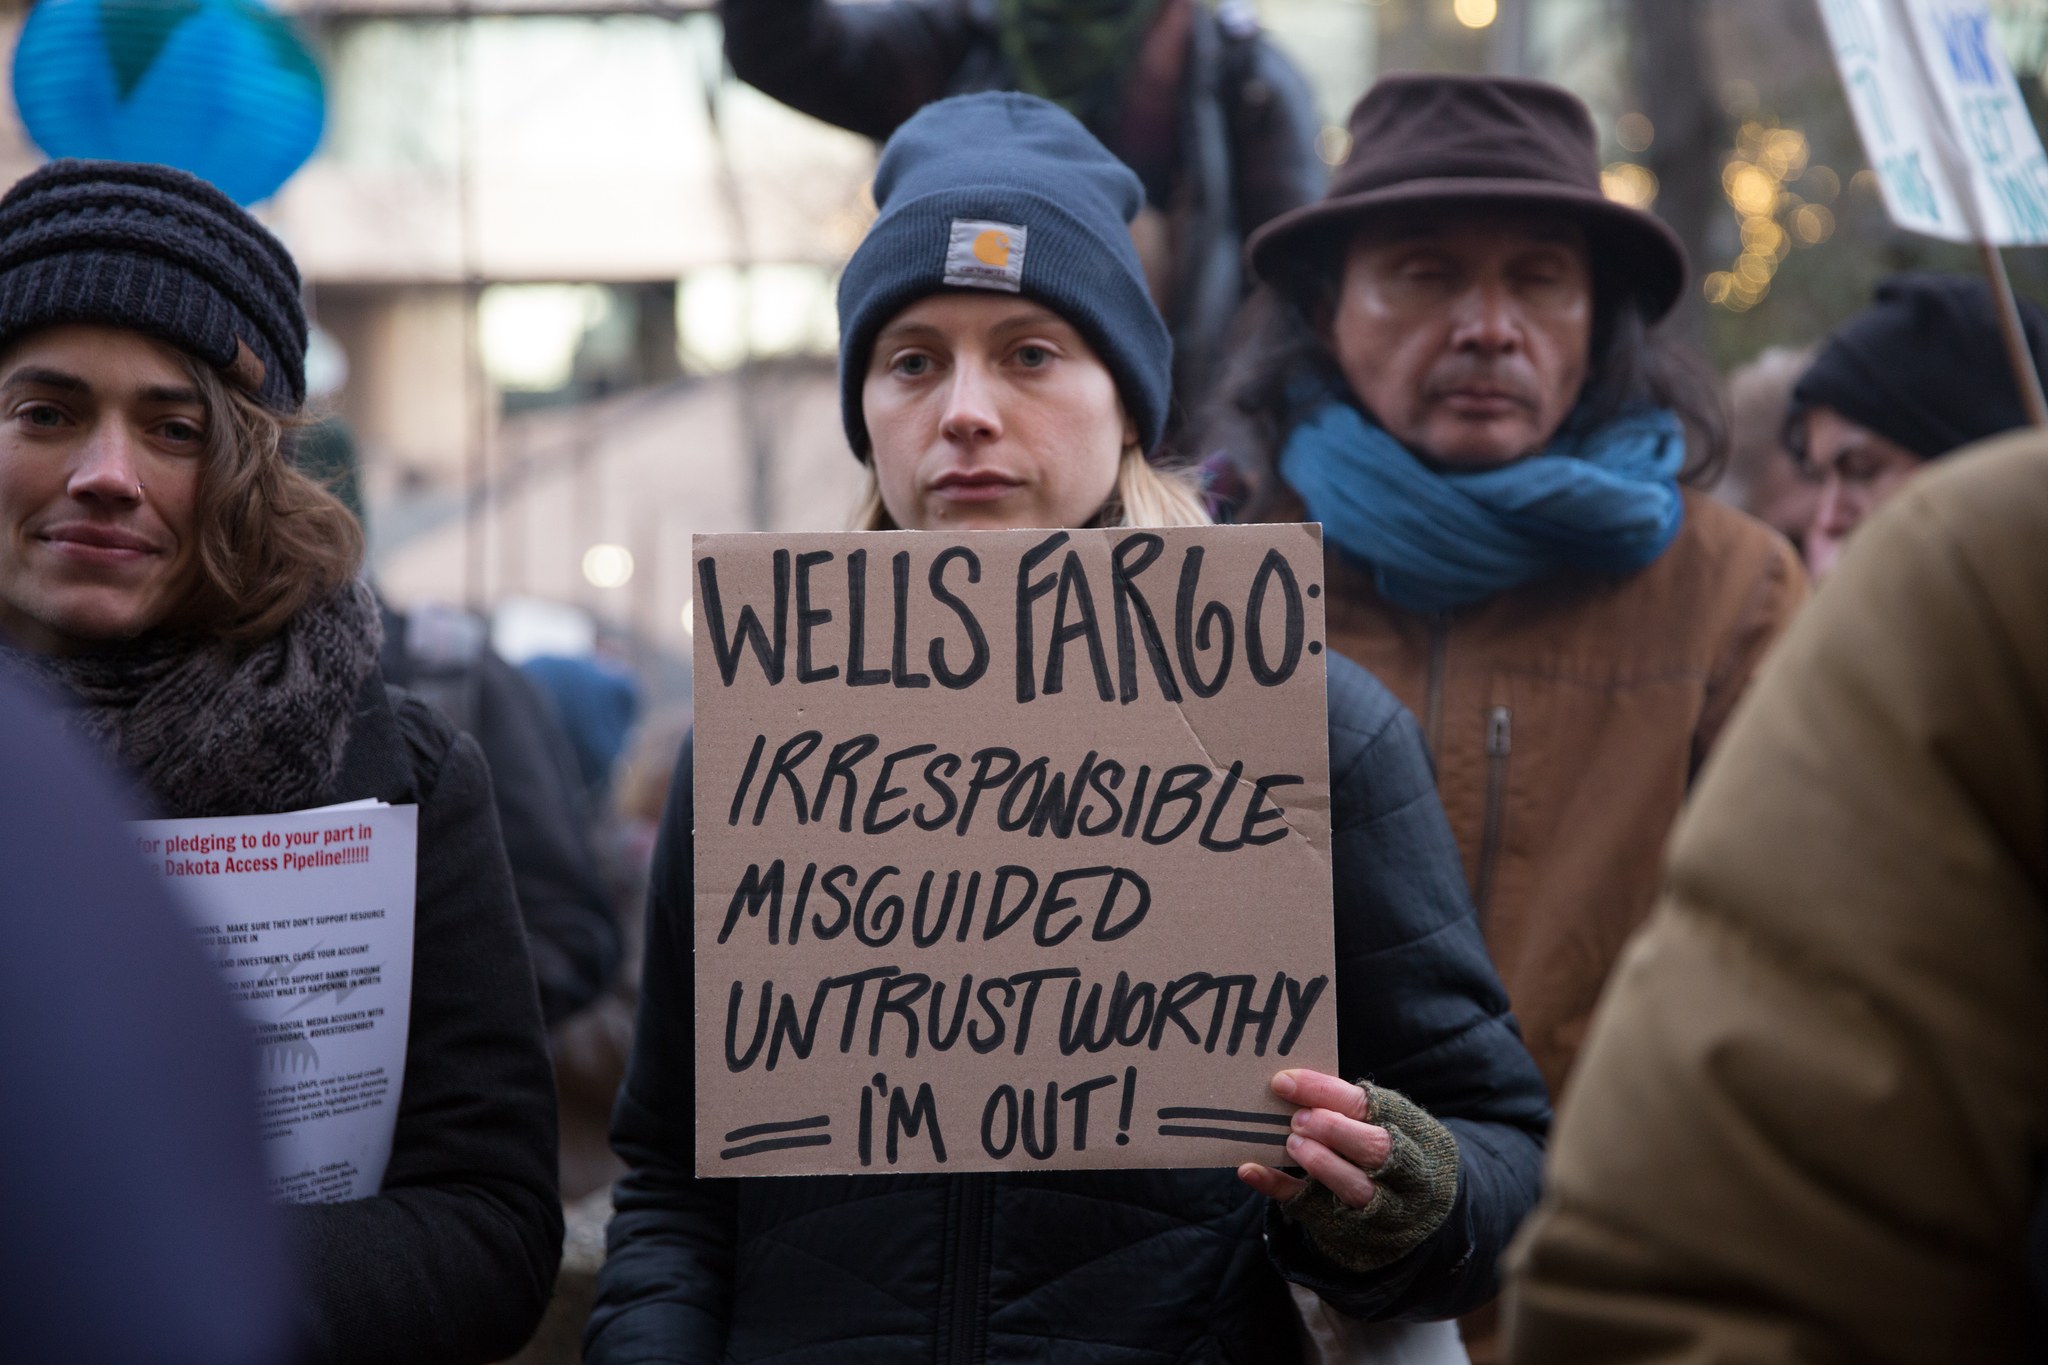 A protester outside the Wells Fargo building in downtown Seattle. Photography by Alex Garland